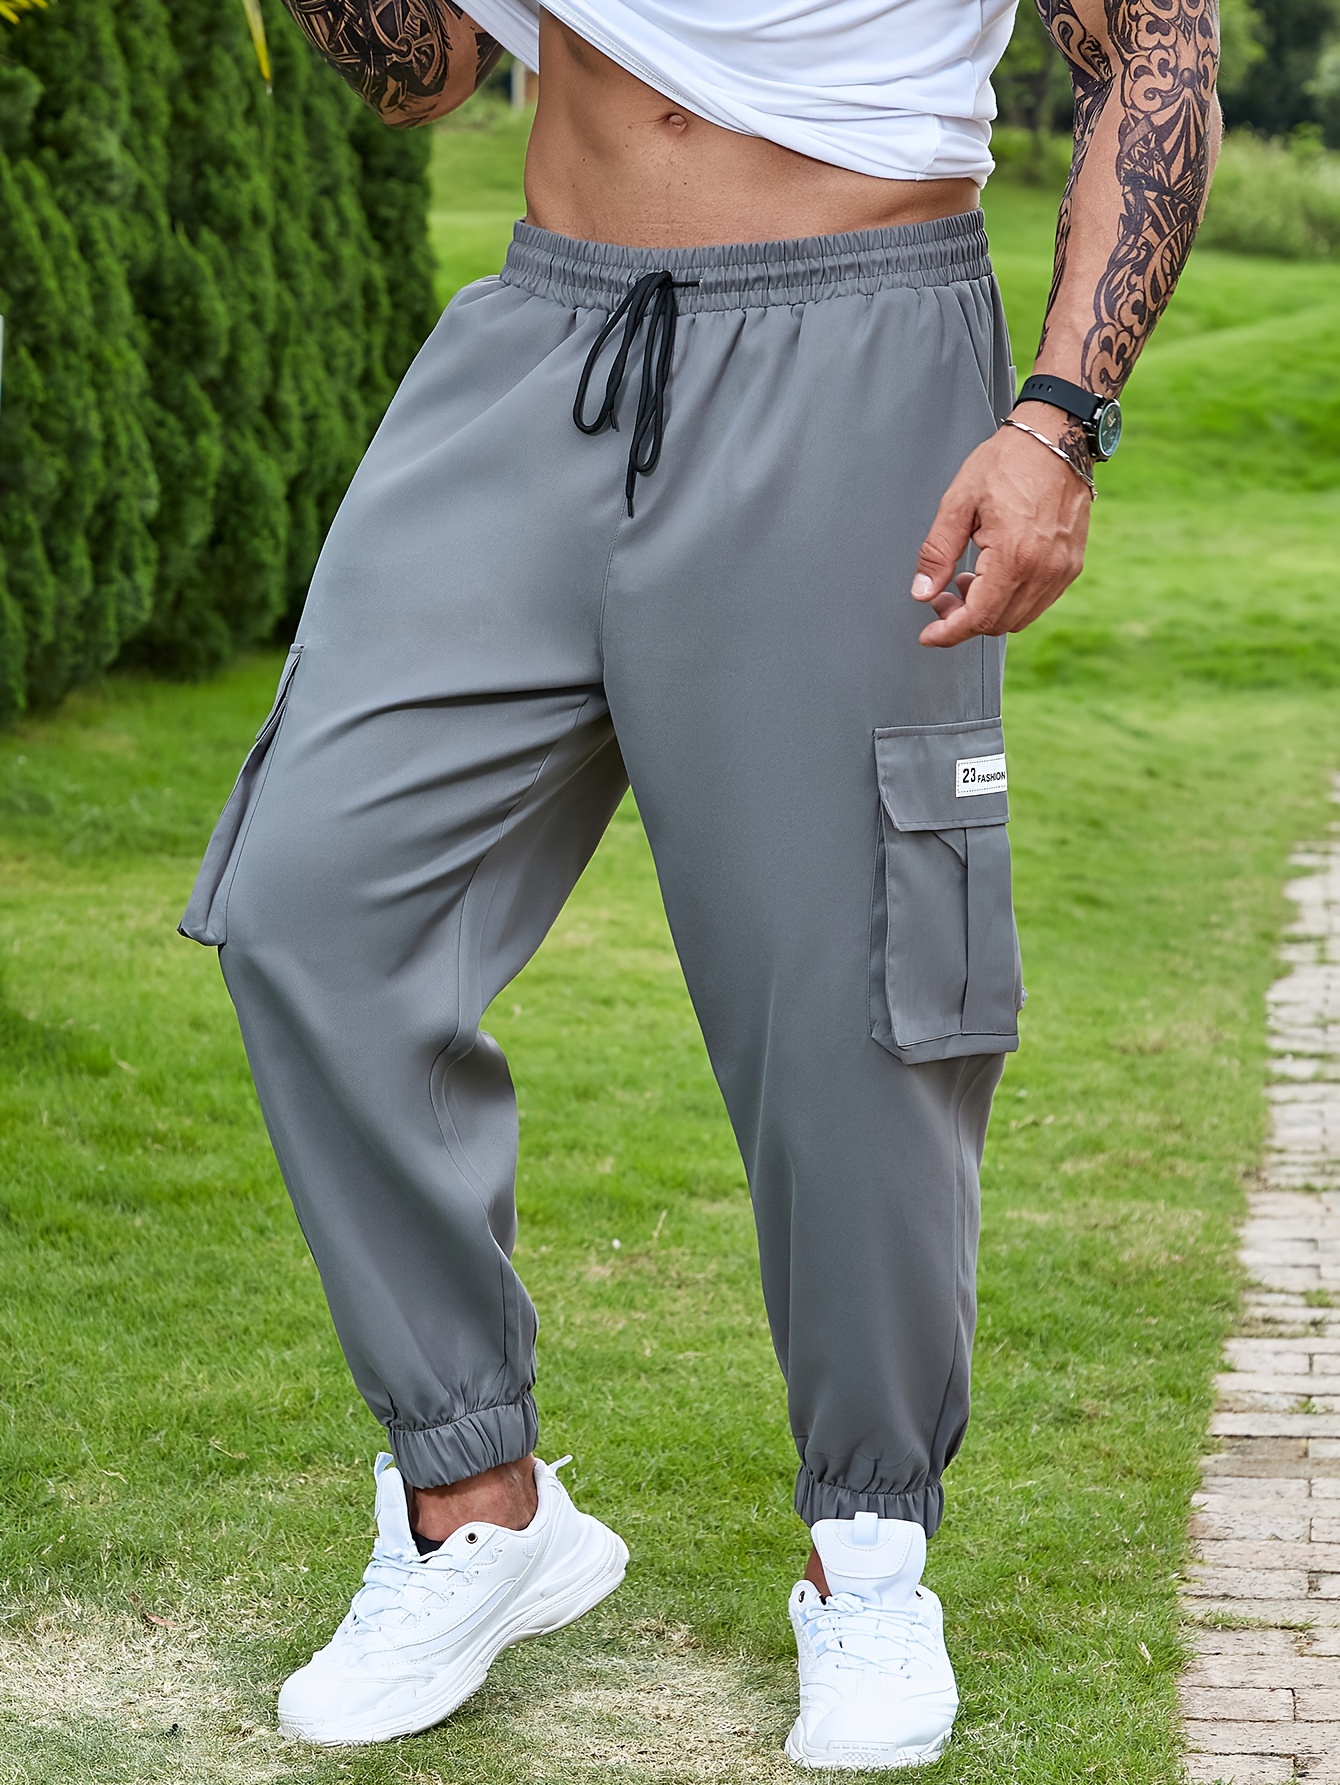 Plus Size Men's Solid Cargo Pants Casual Fashion Pants For Fall Winter,  Men's Clothing